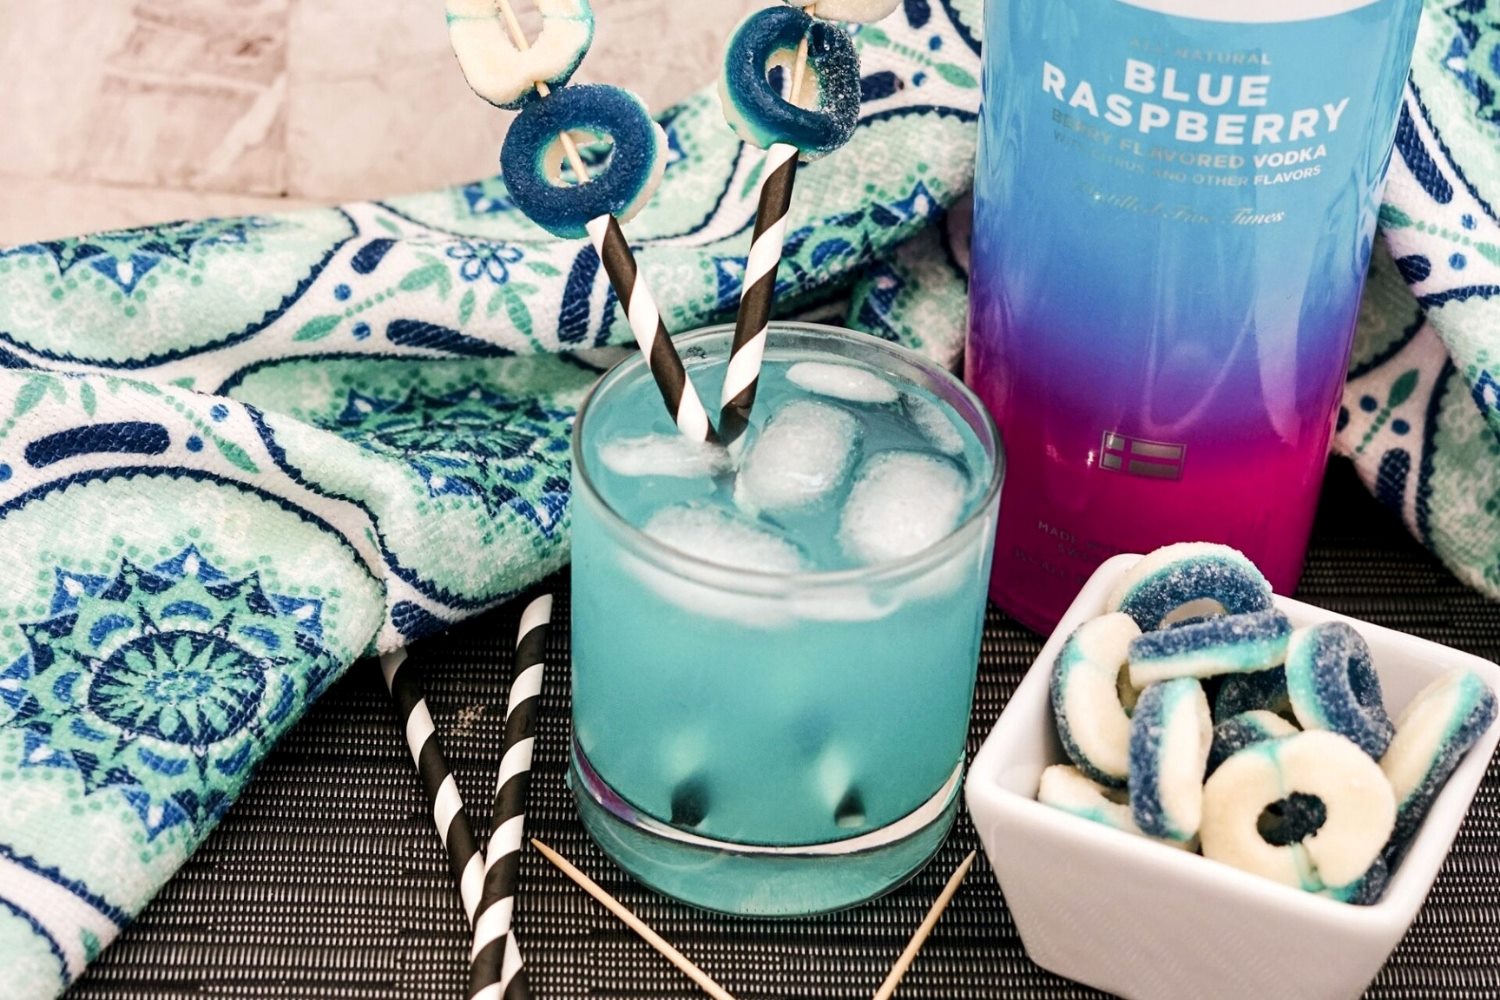 18-captivating-facts-about-blue-raspberry-spiked-lemonade